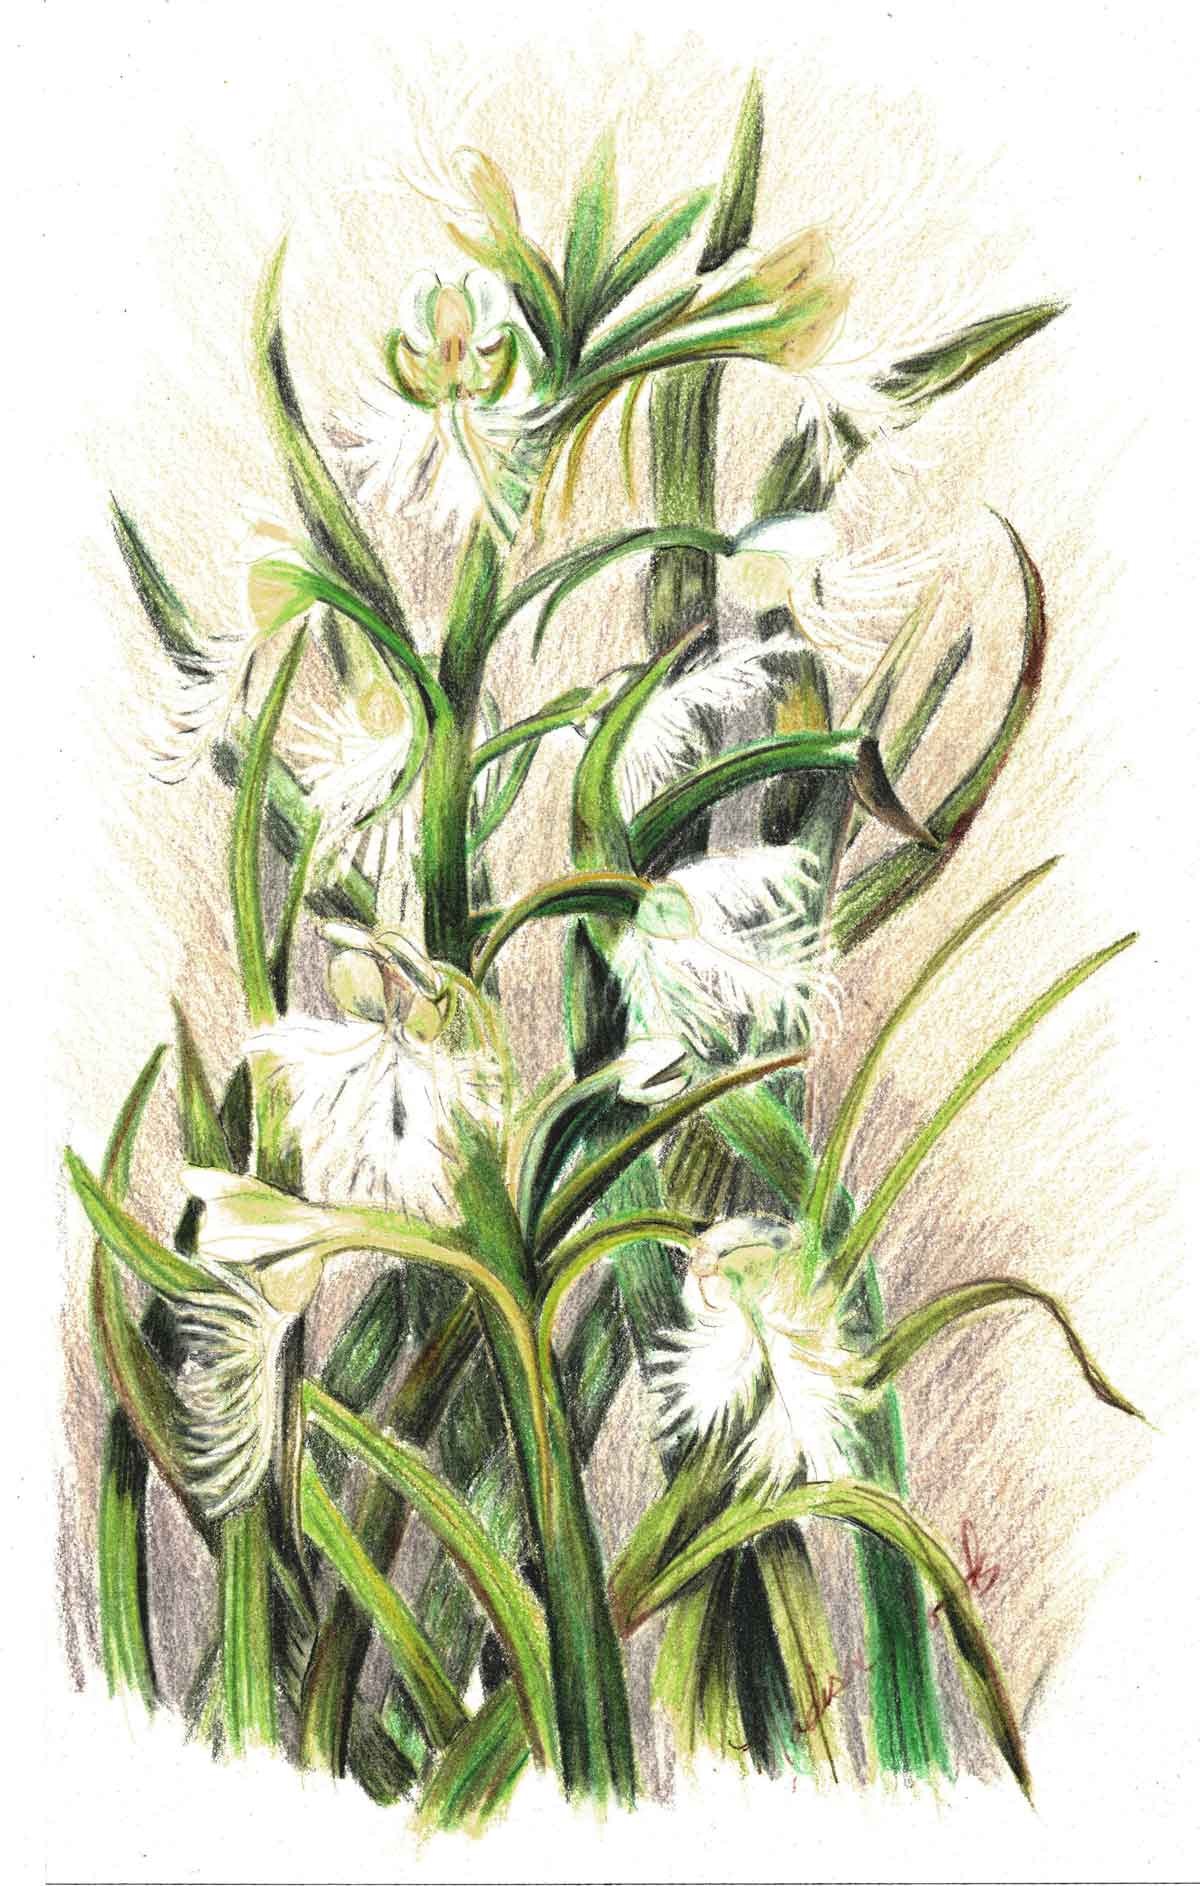 This rare Eastern Prairie Fringed orchid is part of my NFT Orchid collection at Openseas.io.